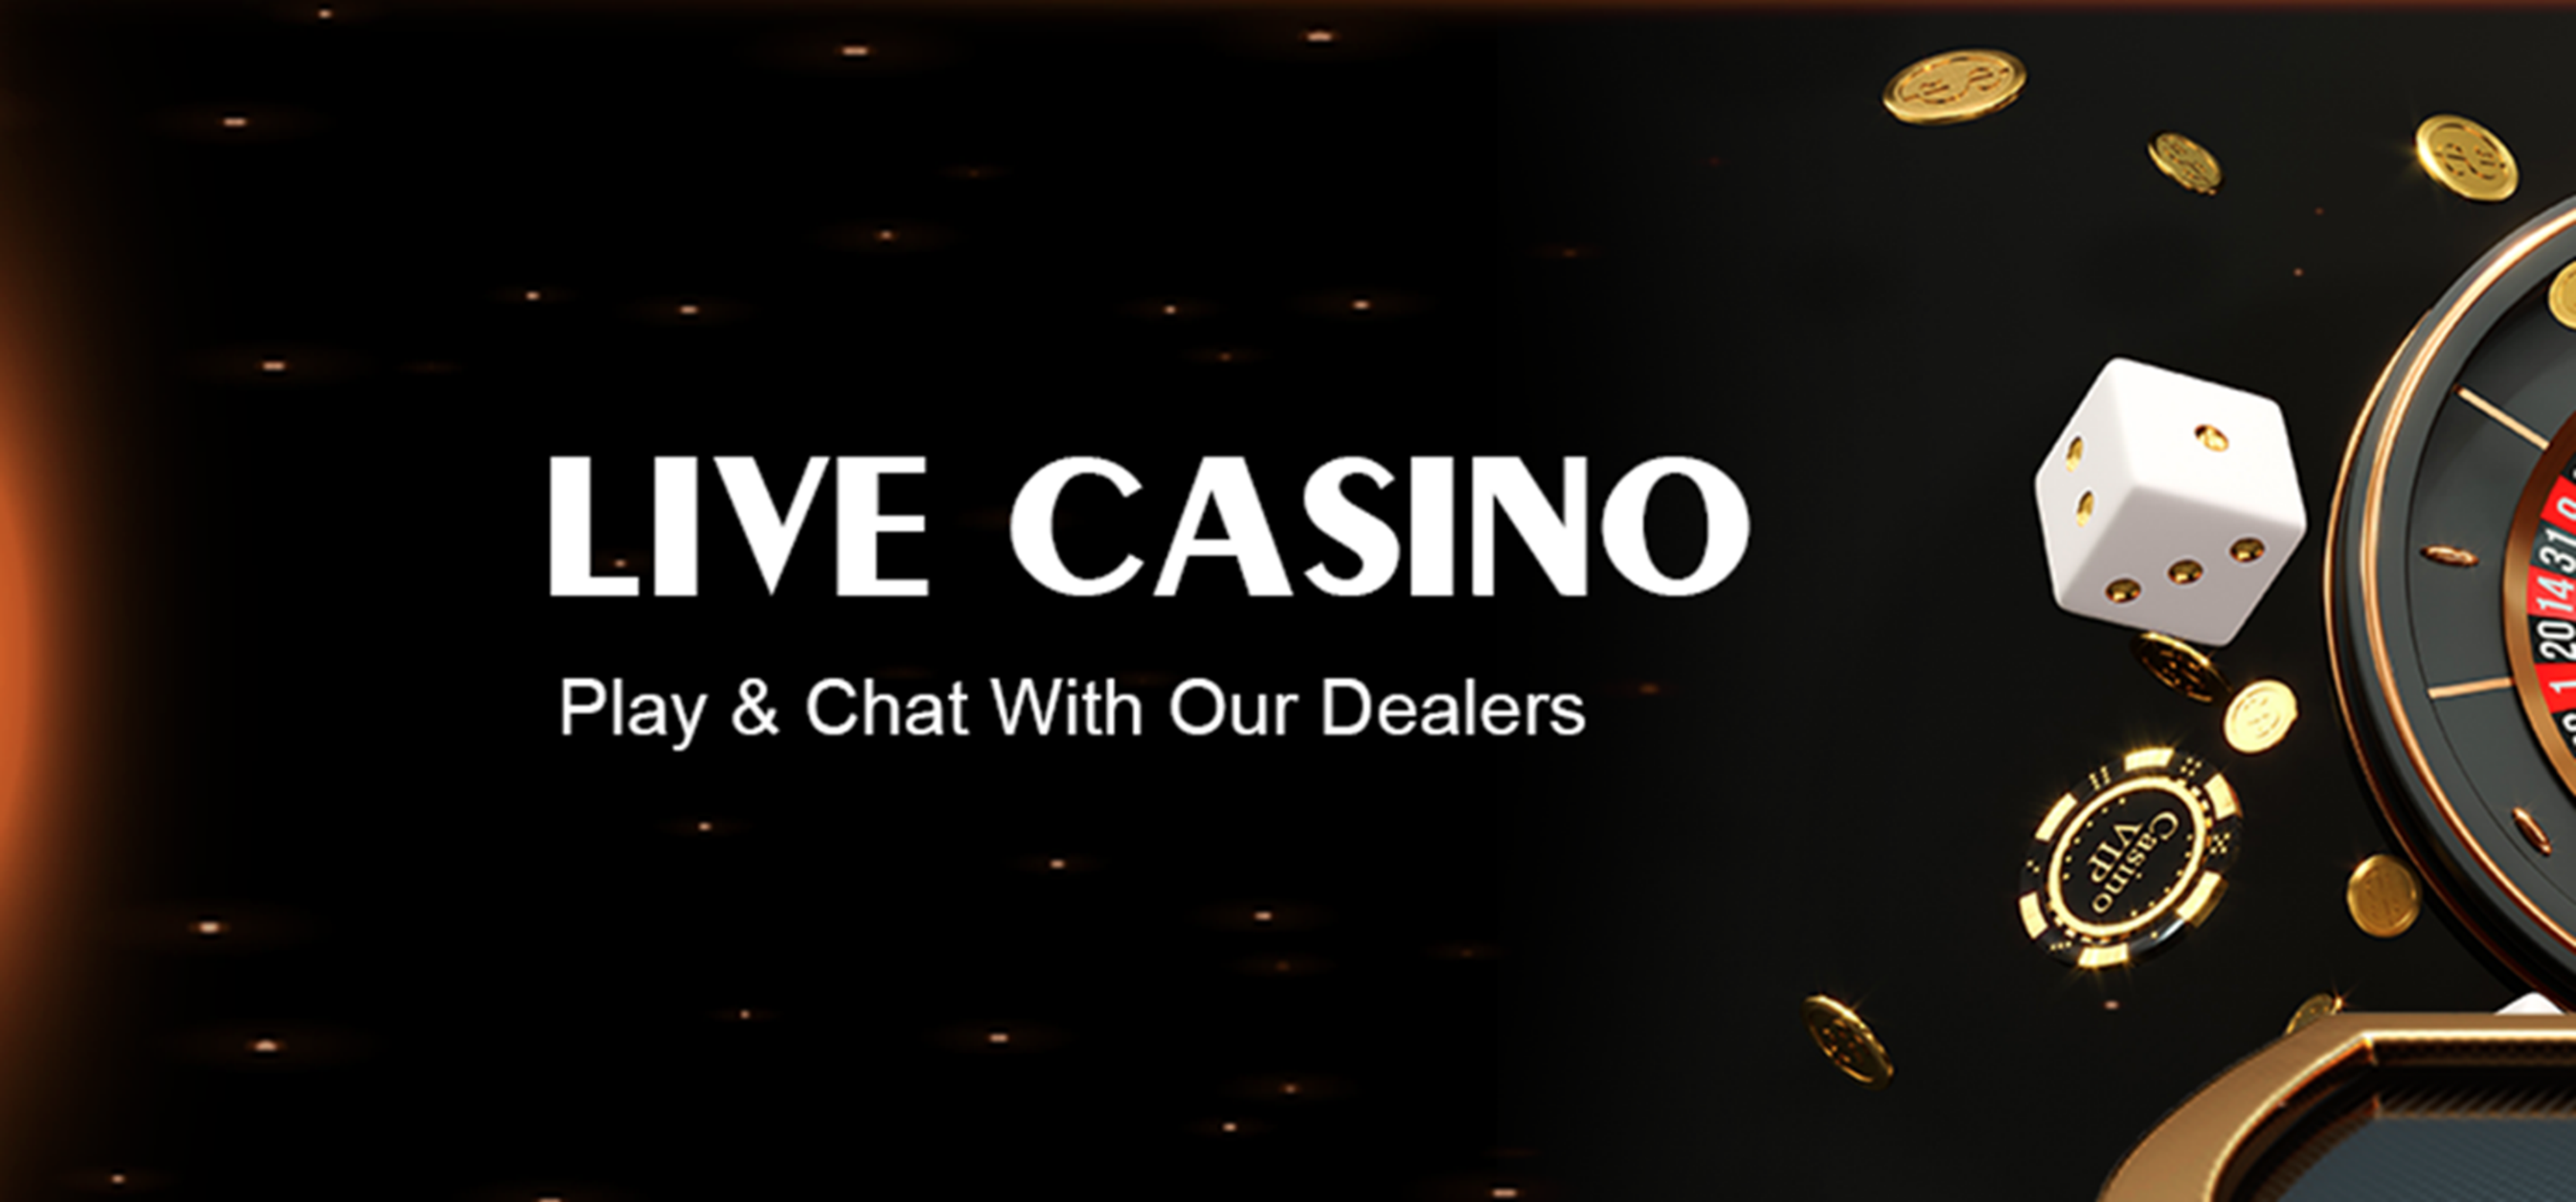 How to Take Advantage of Online Casino Promotions?